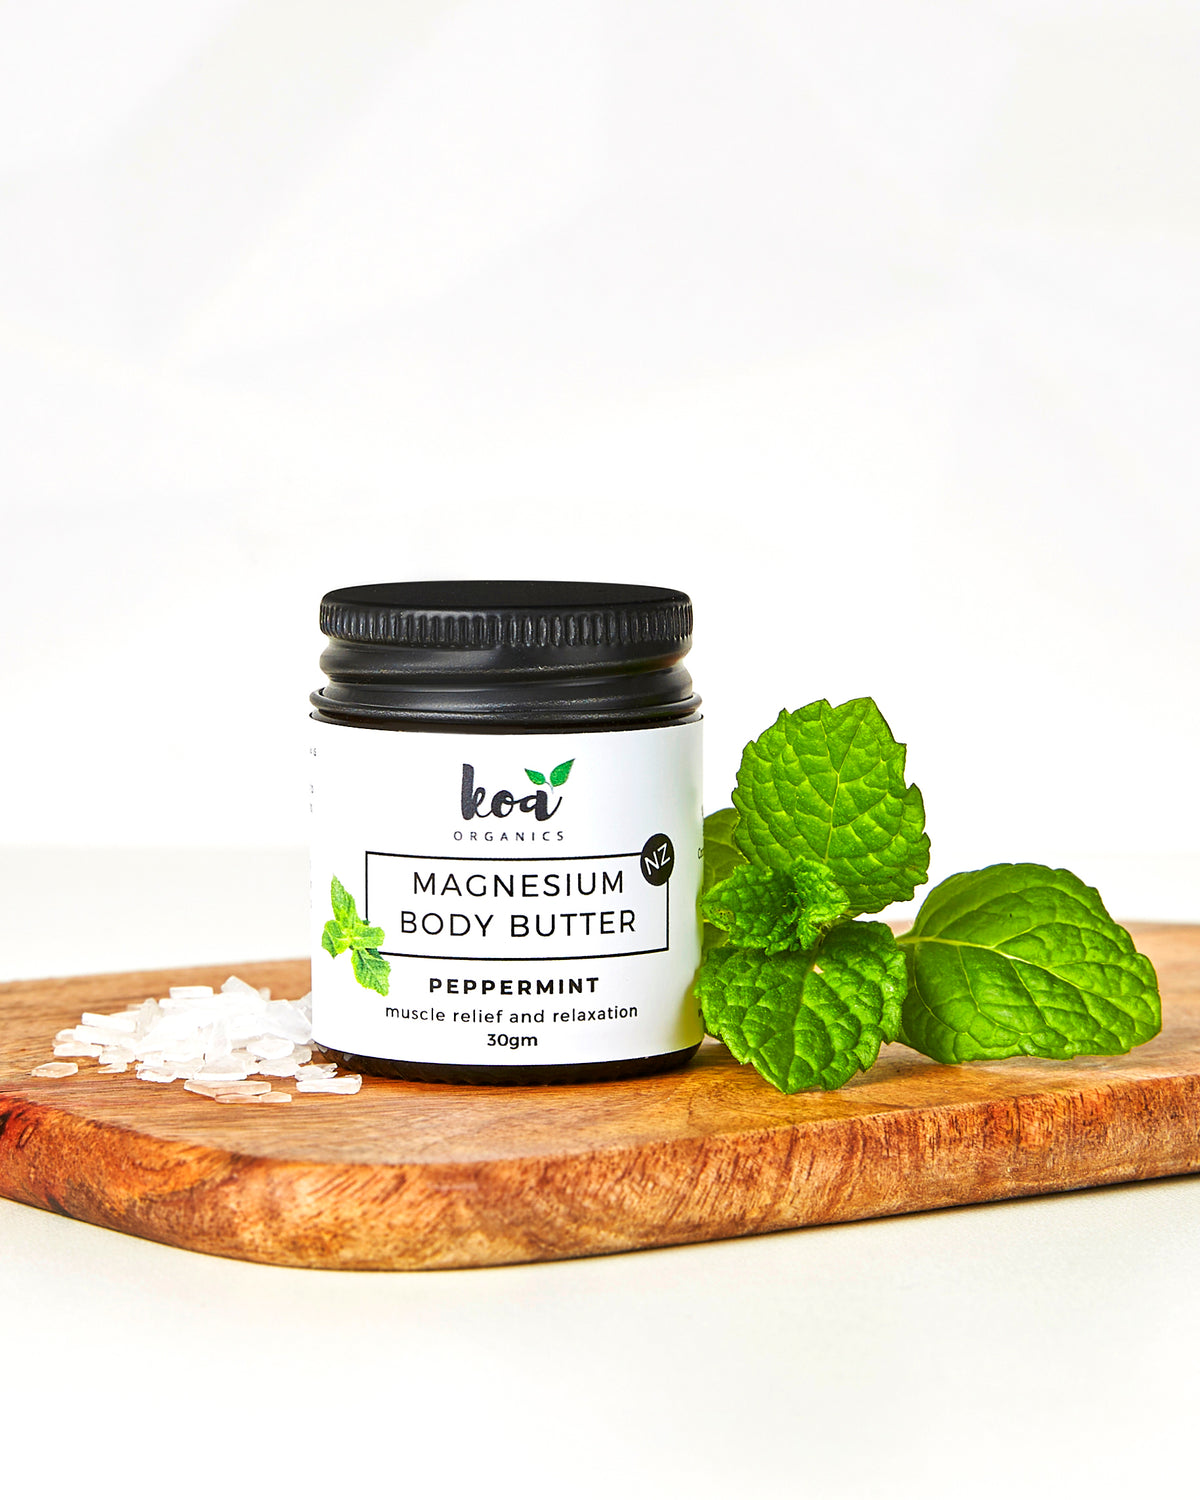 Magnesium Body Butter with Peppermint